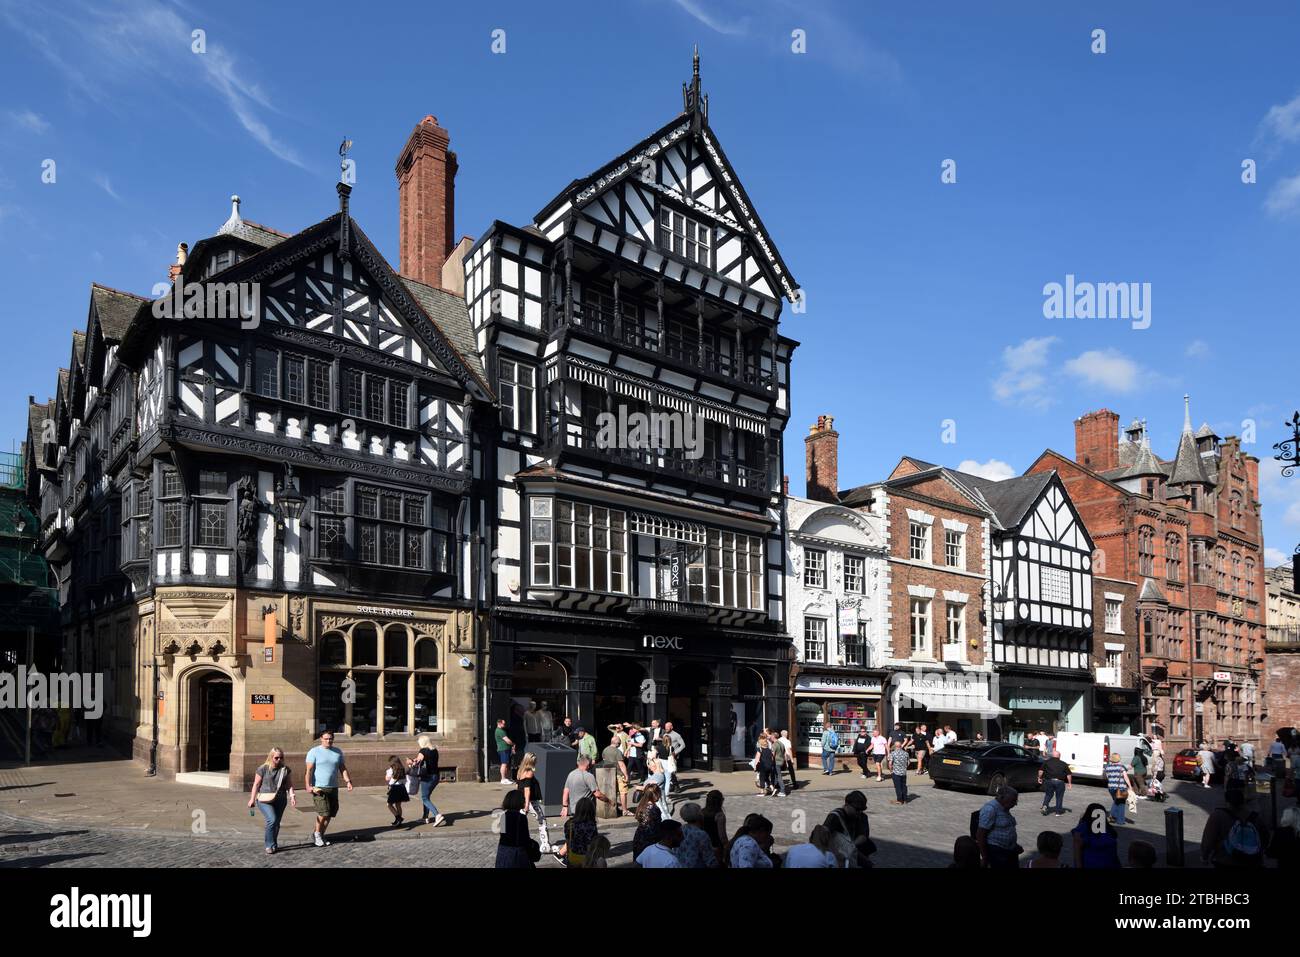 Tourists & Shoppers Eastgate Street Chester Old Town or Historic District England UK including Victorian Tudor Style Corner Buildings Nos 35 & 37. Stock Photo